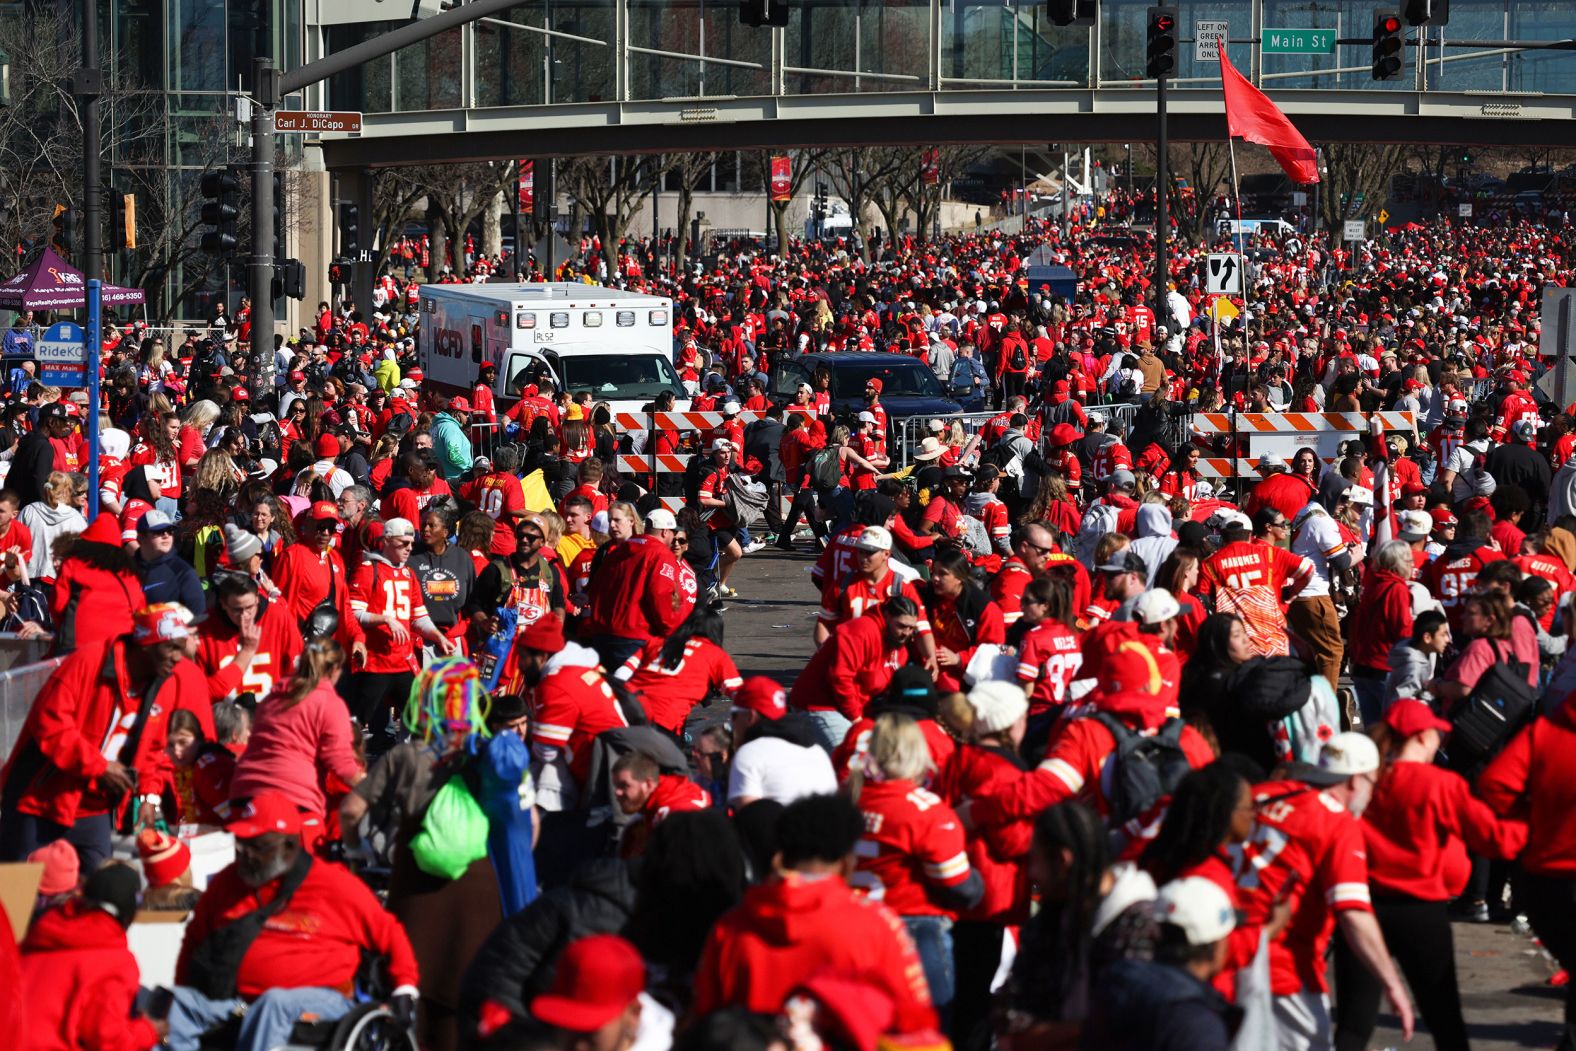 An estimated 1 million people were in downtown Kansas City on Wednesday to celebrate the Chiefs' back-to-back Super Bowl titles.